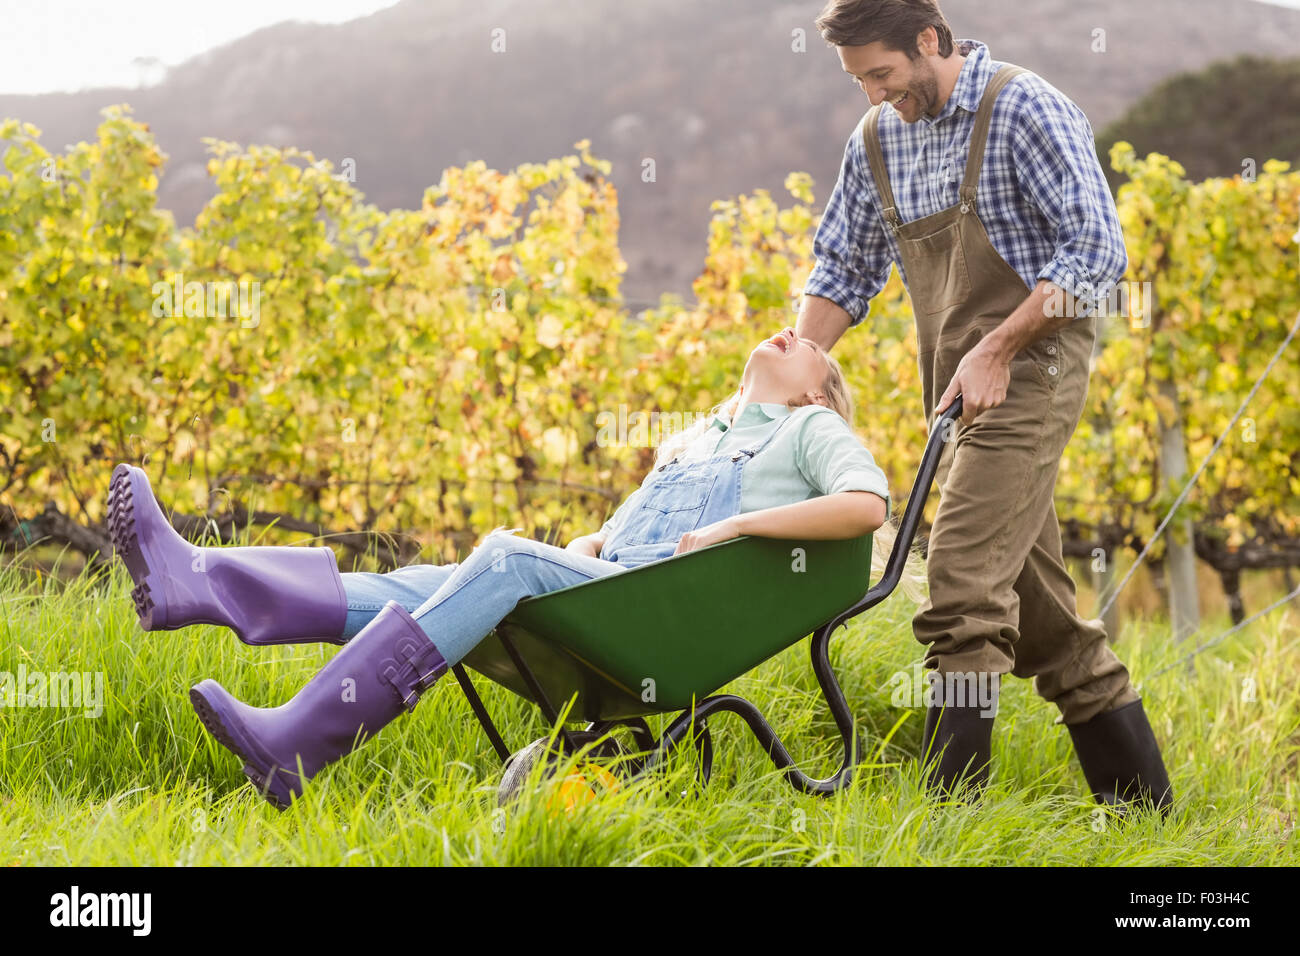 Laughing couple in dungarees pushing a wheelbarrow Stock Photo